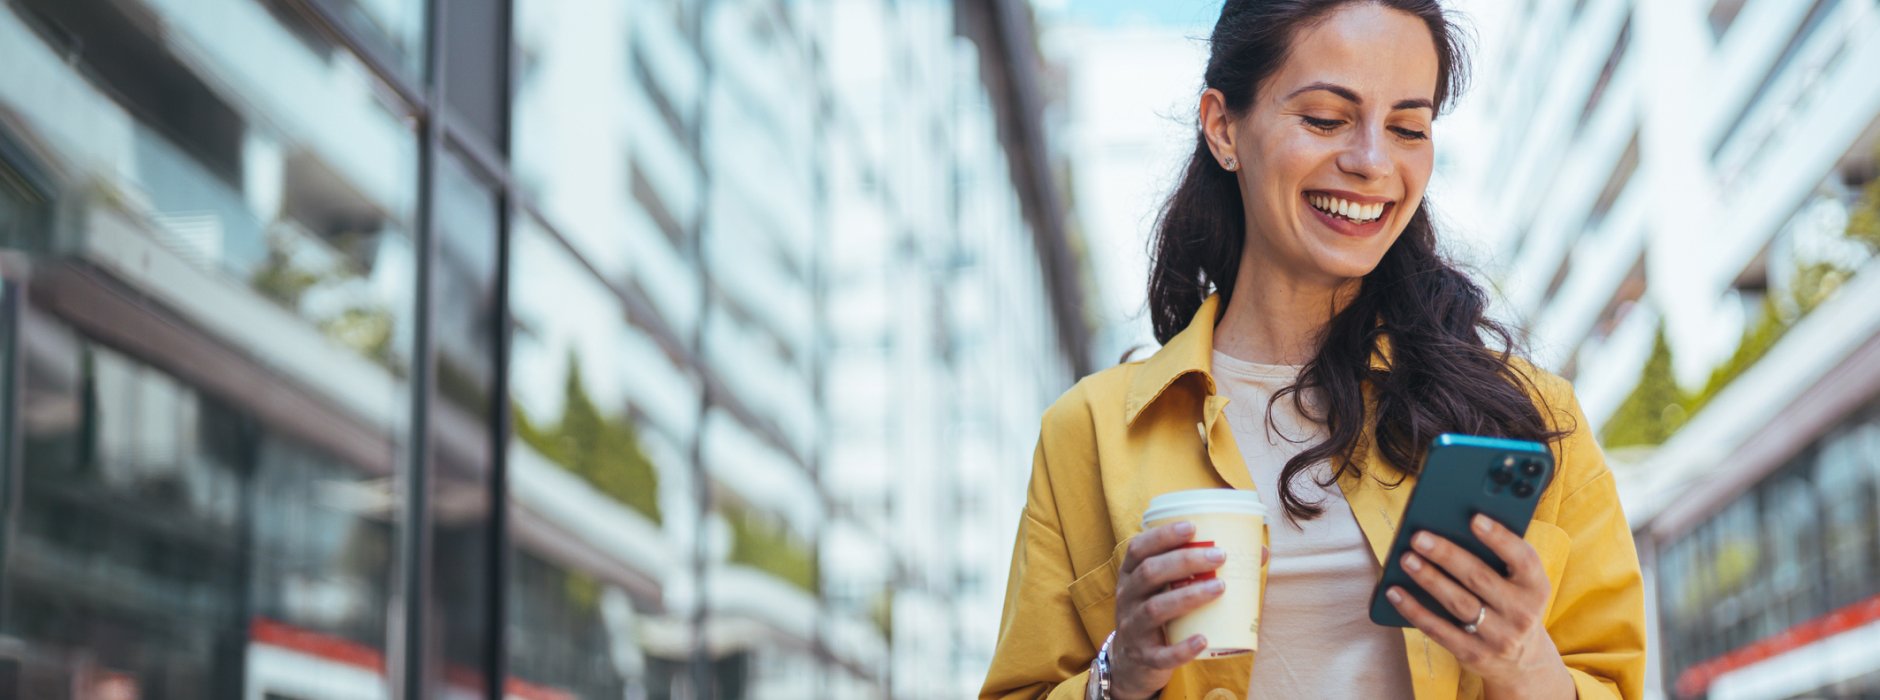 woman with coffee in her hand looking at her phone smiling